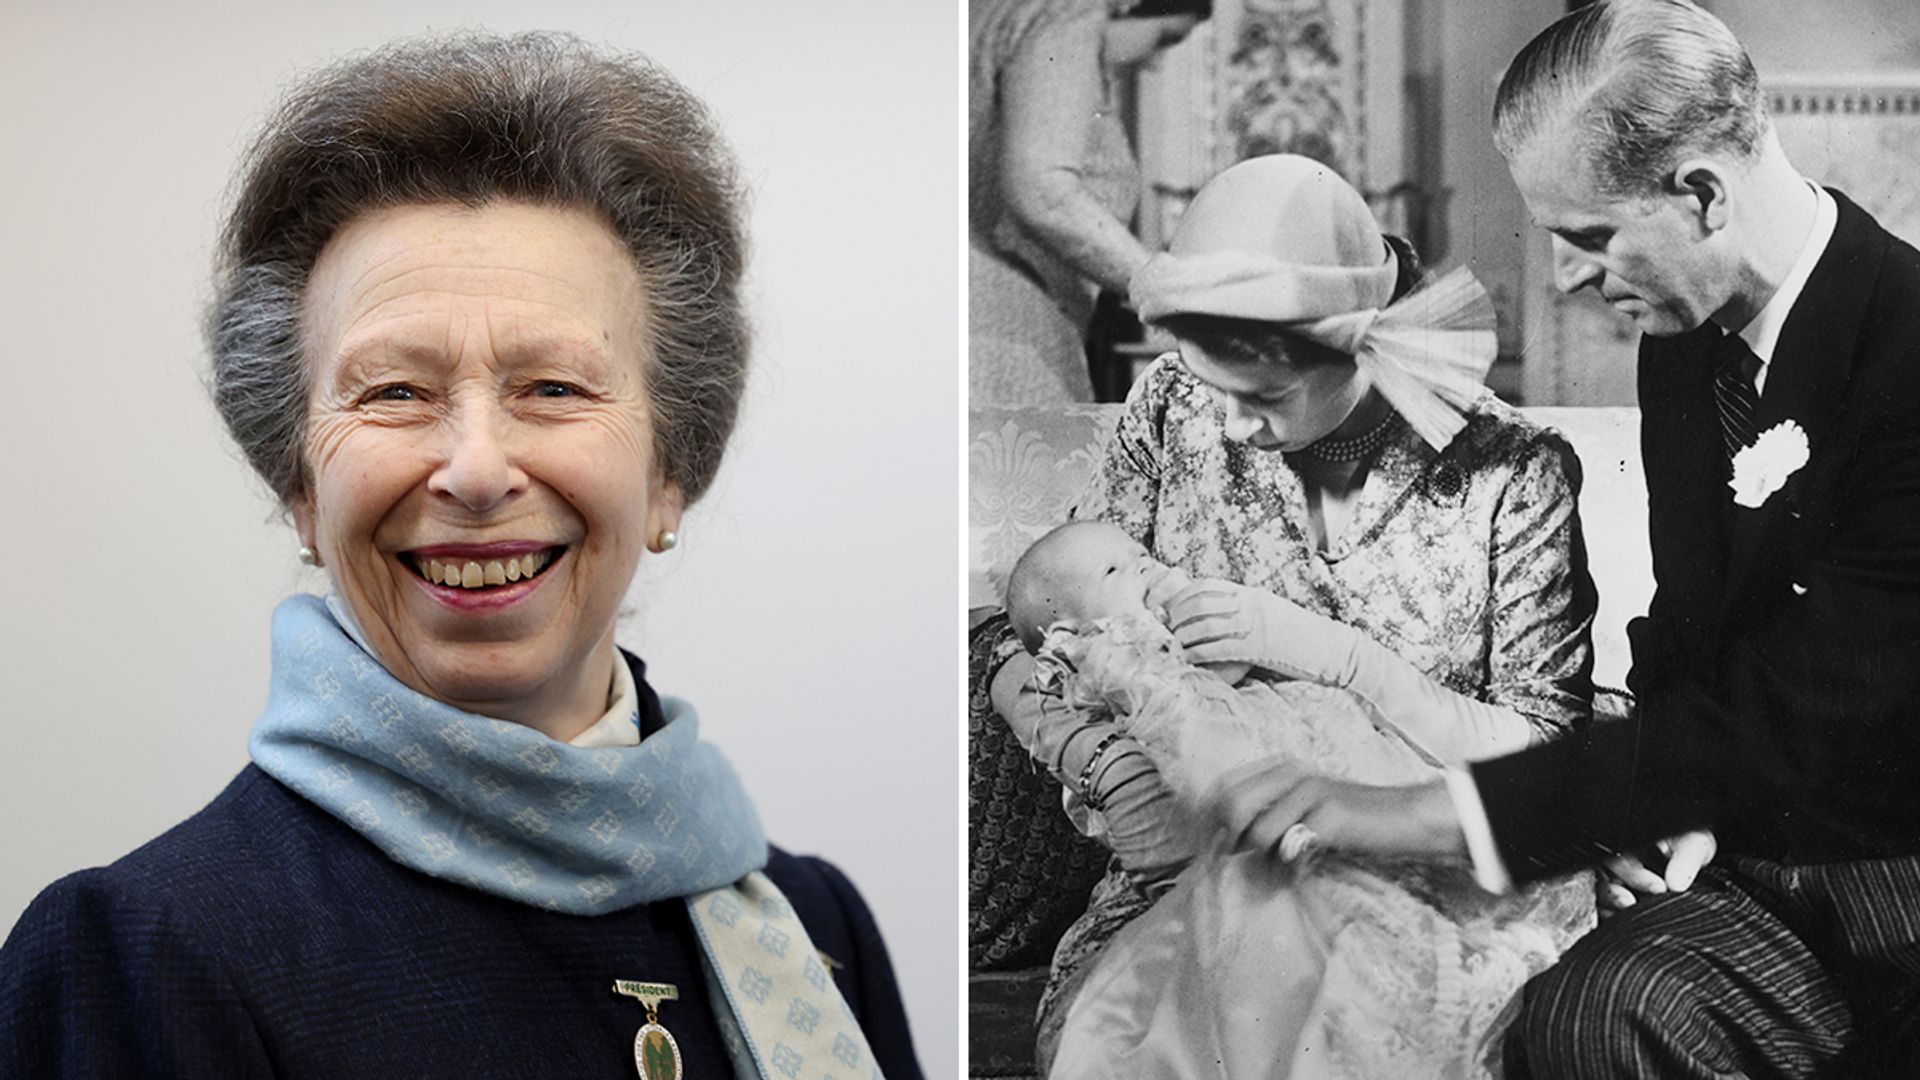 Split image of Princess Anne as she is now to one of her as a baby with the Queen and Prince Philip